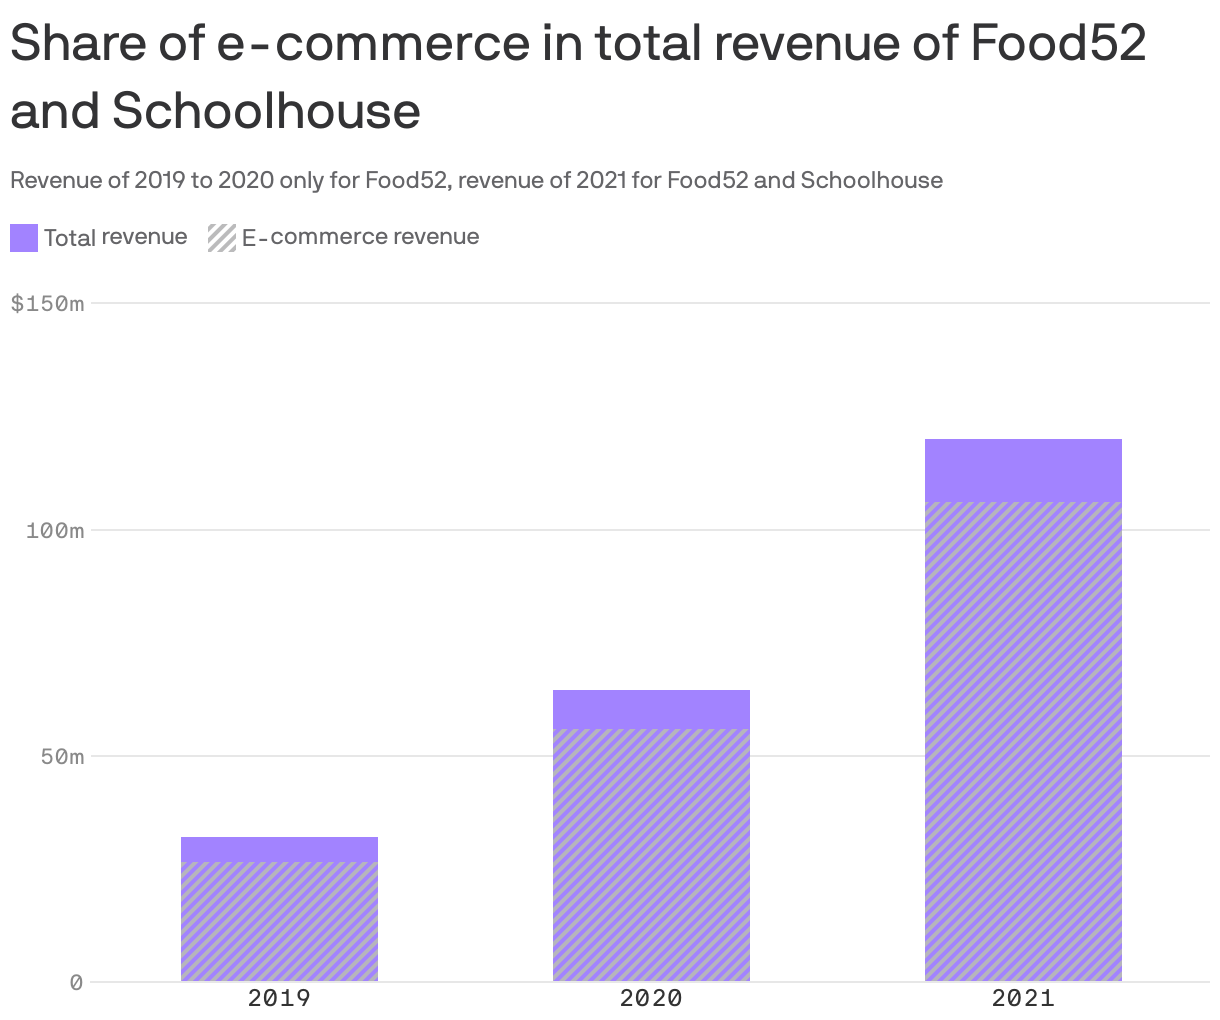 Share of e-commerce in total revenue of Food52 and Schoolhouse